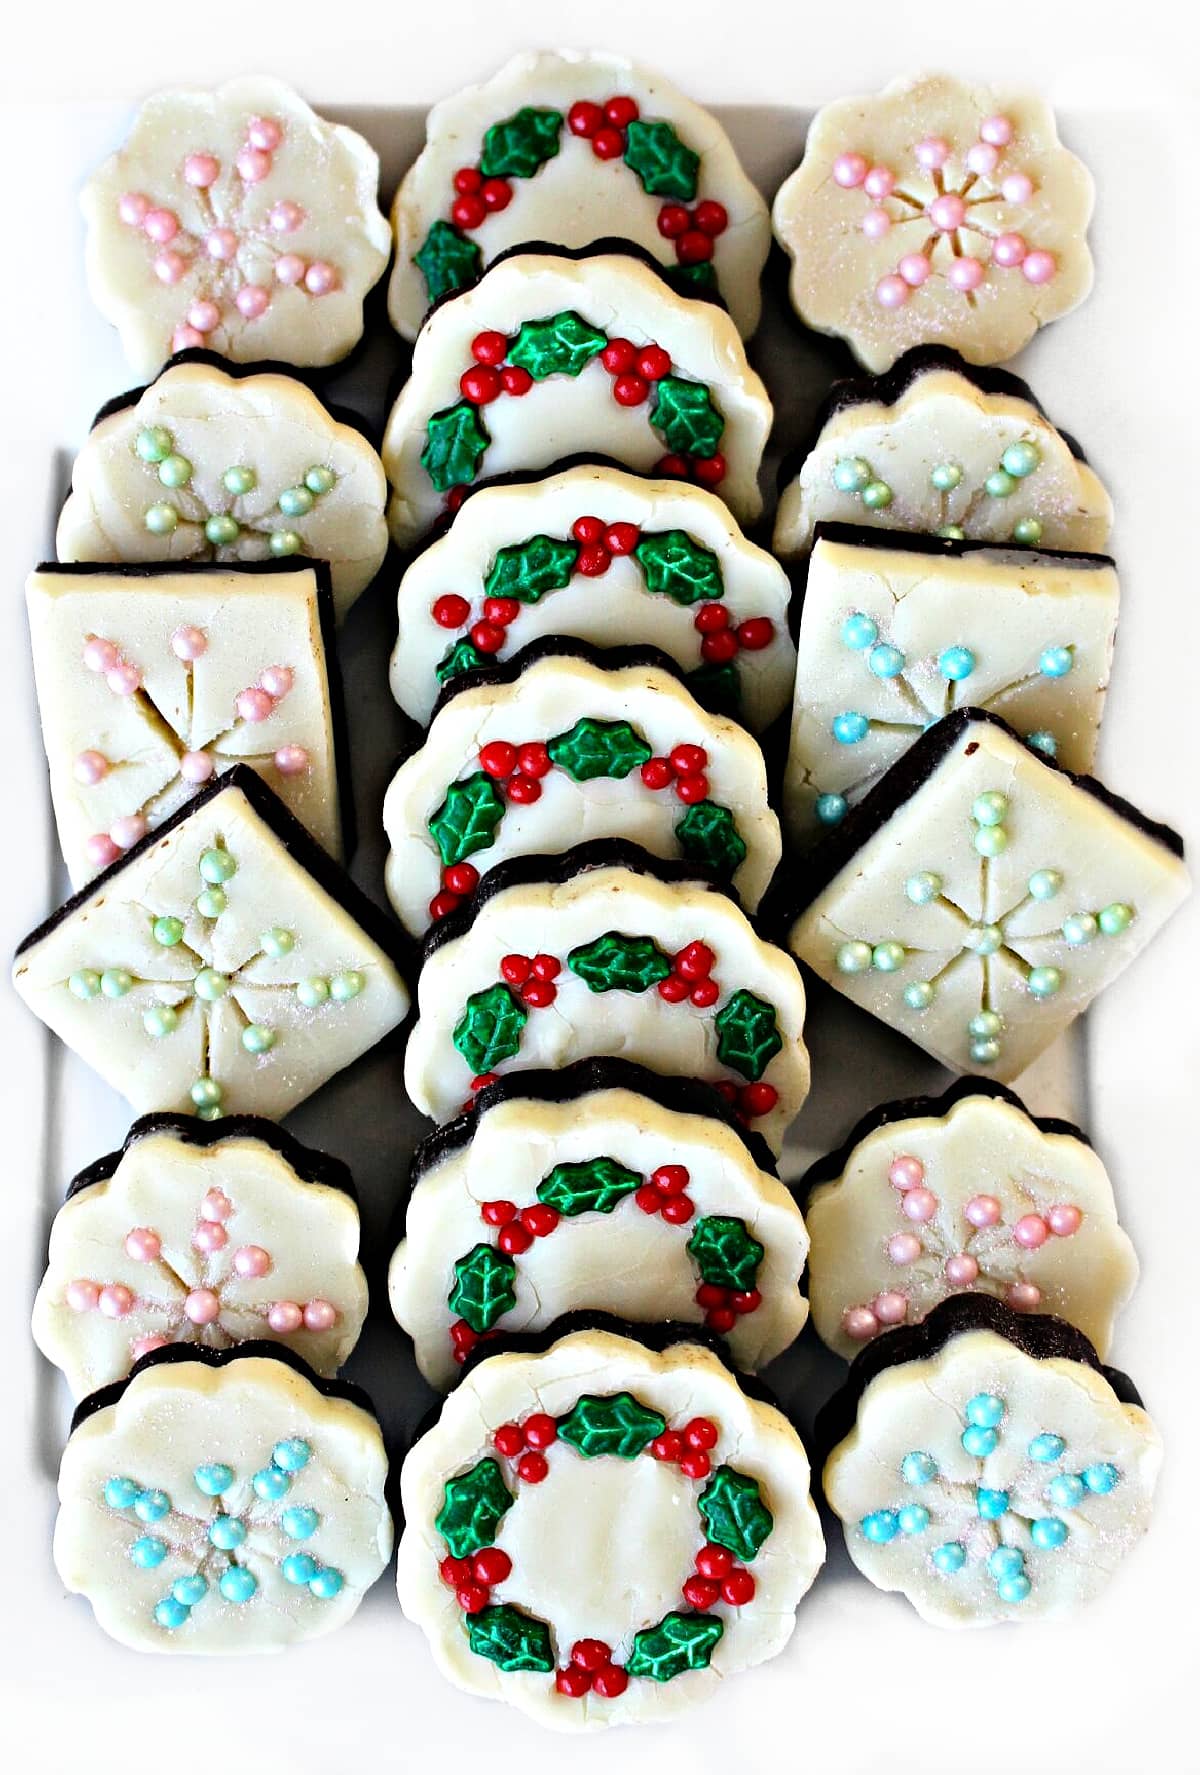 Double decker fudge decorated like snowflakes and wreaths.